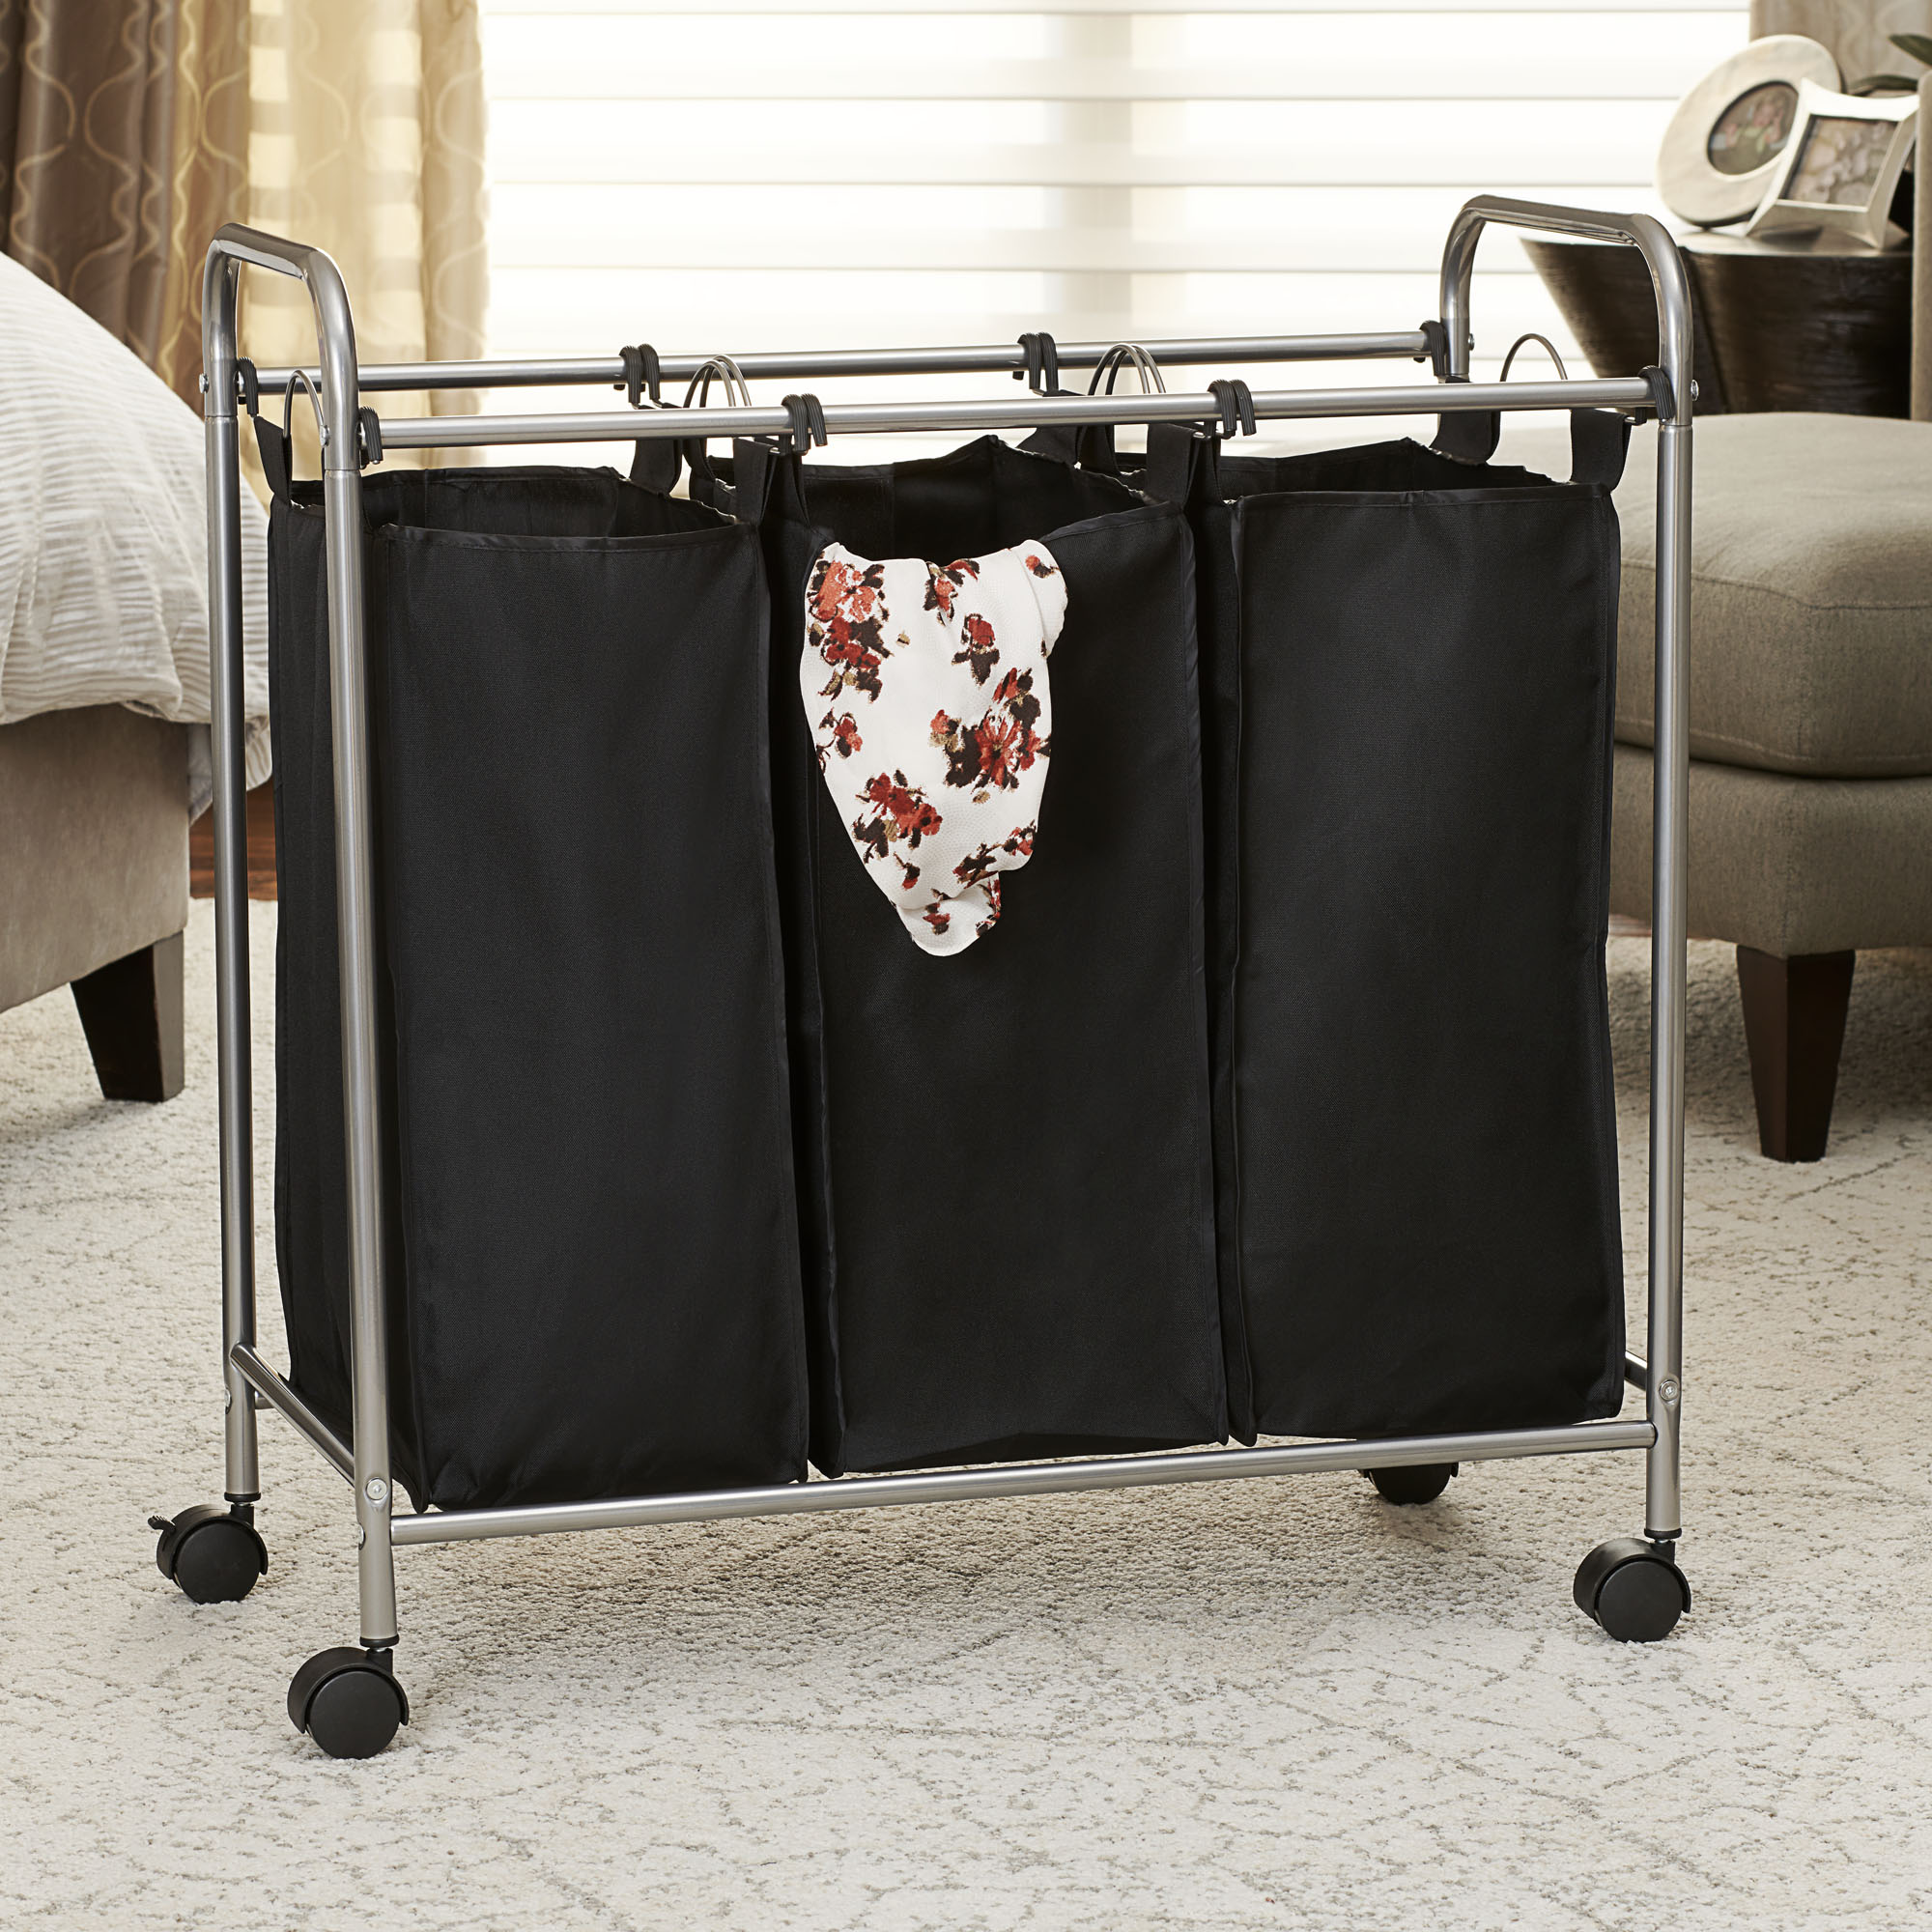 Household Essentials Rolling Triple Laundry Sorter, Black - image 1 of 3